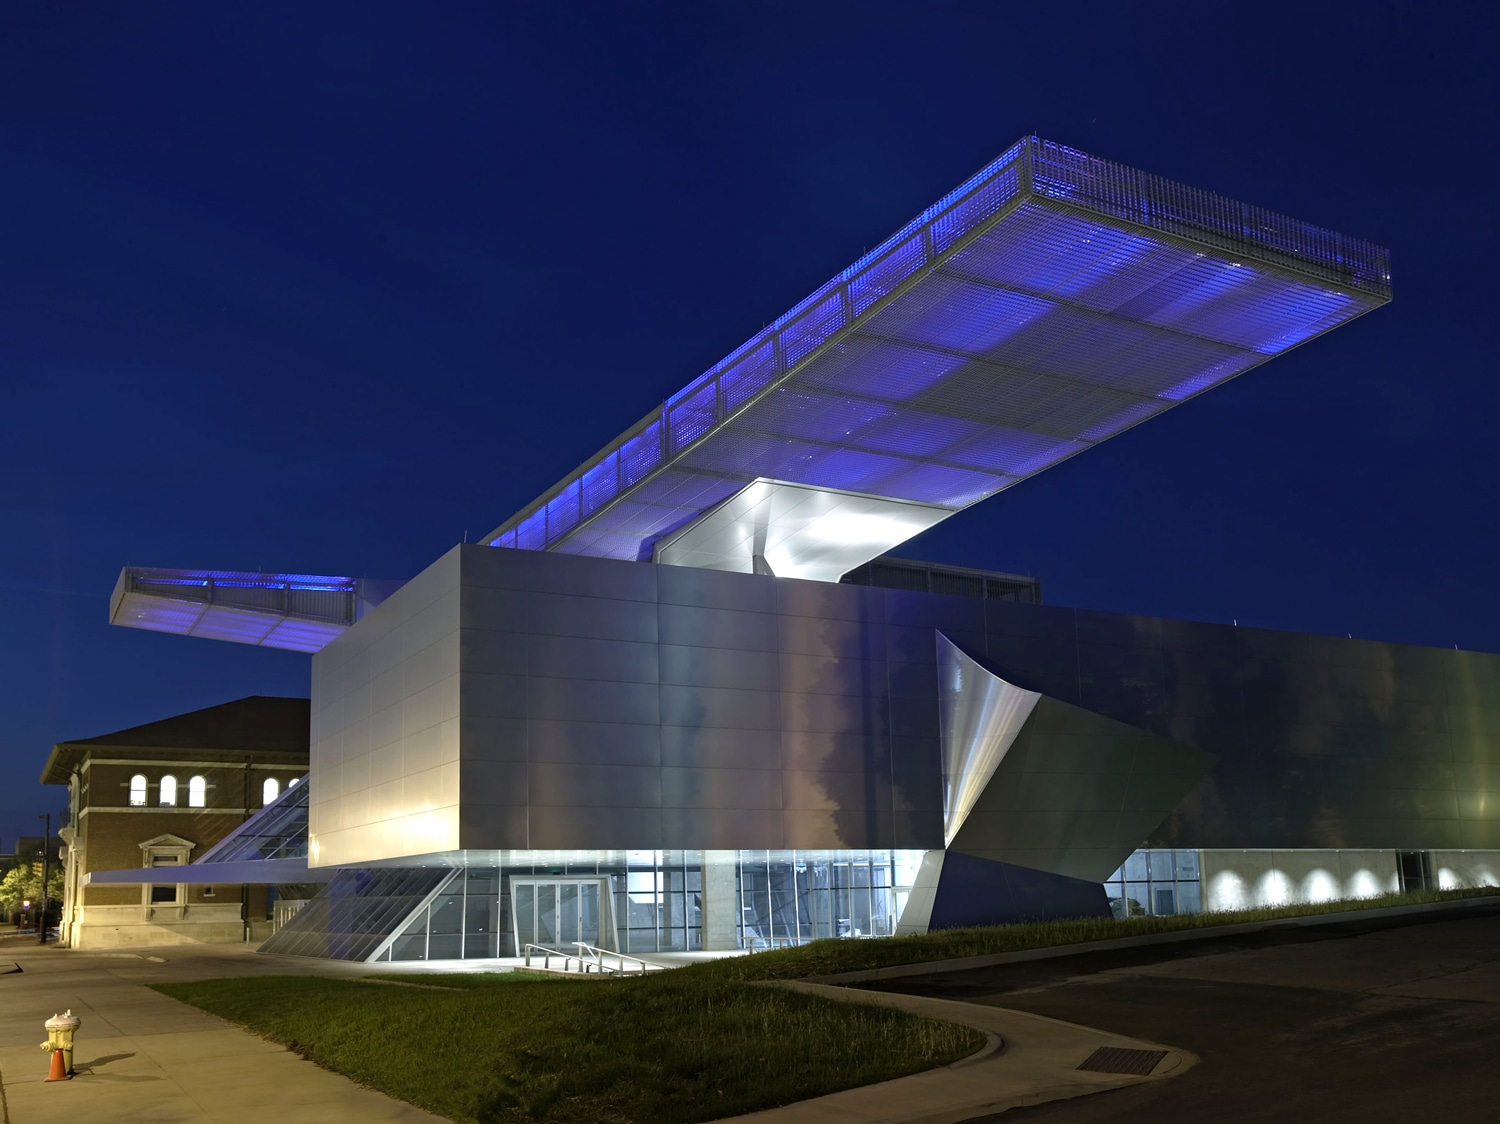 Exterior night view of the sculpture at Akron Art Museum in Akron, Ohio. Coop-Himmelblau Architects, rainscreen cladding system by Riverside Group.